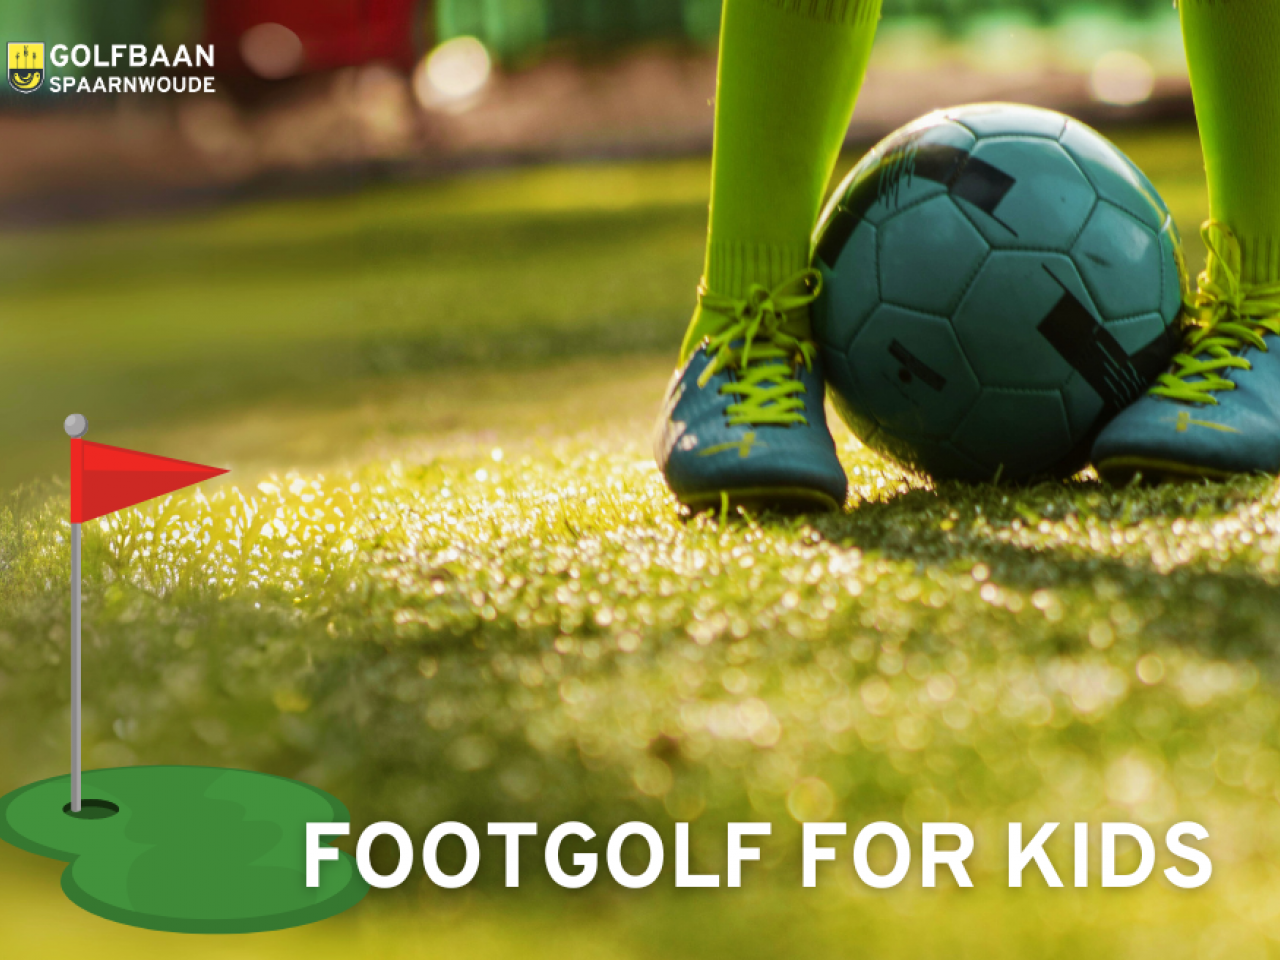 Footgolf ball with feet